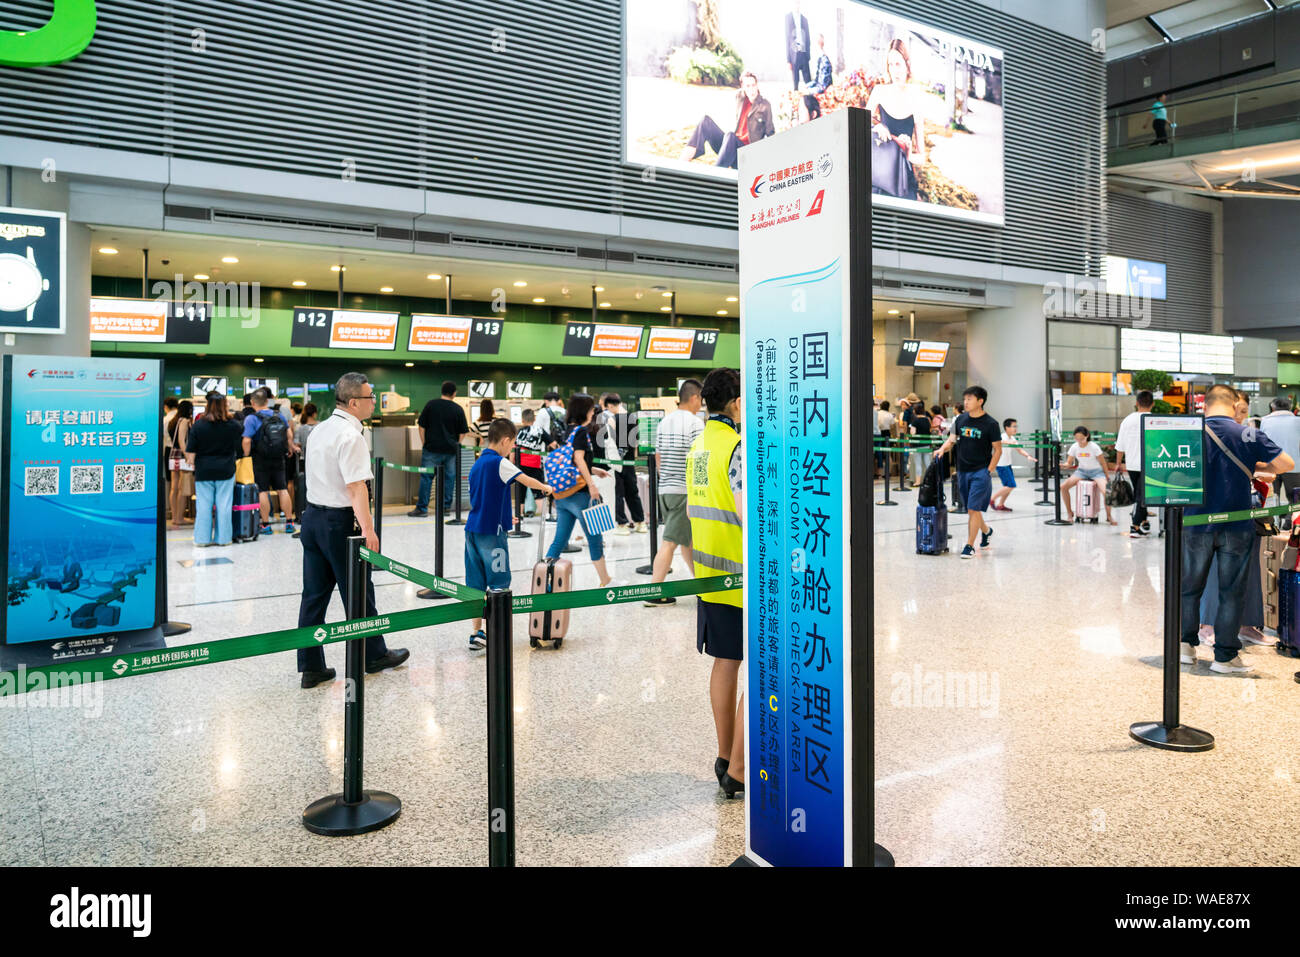 A view of the Domestic economy class check-in area of China Eastern Airlines in Terminal 2, Shanghai Hongqiao International Airport with passengers walking by. Stock Photo